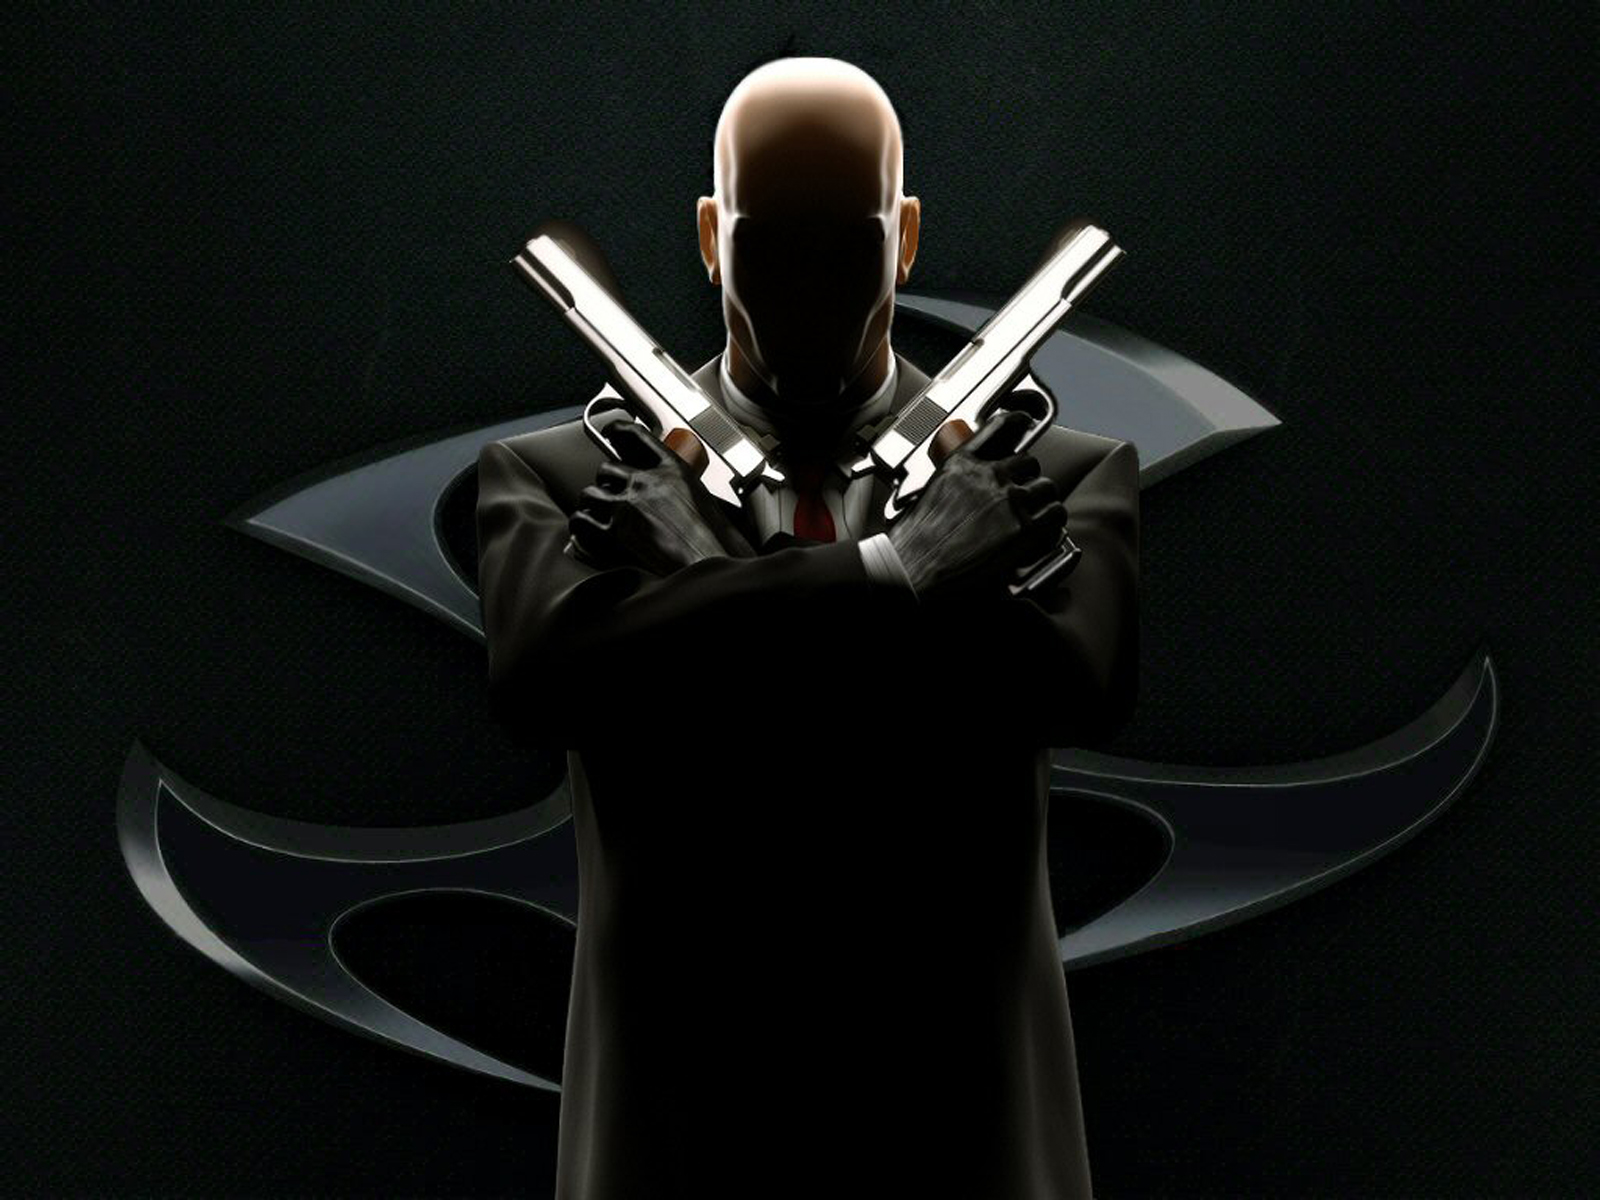 Hitman Absolution Game HD Wallpaper In